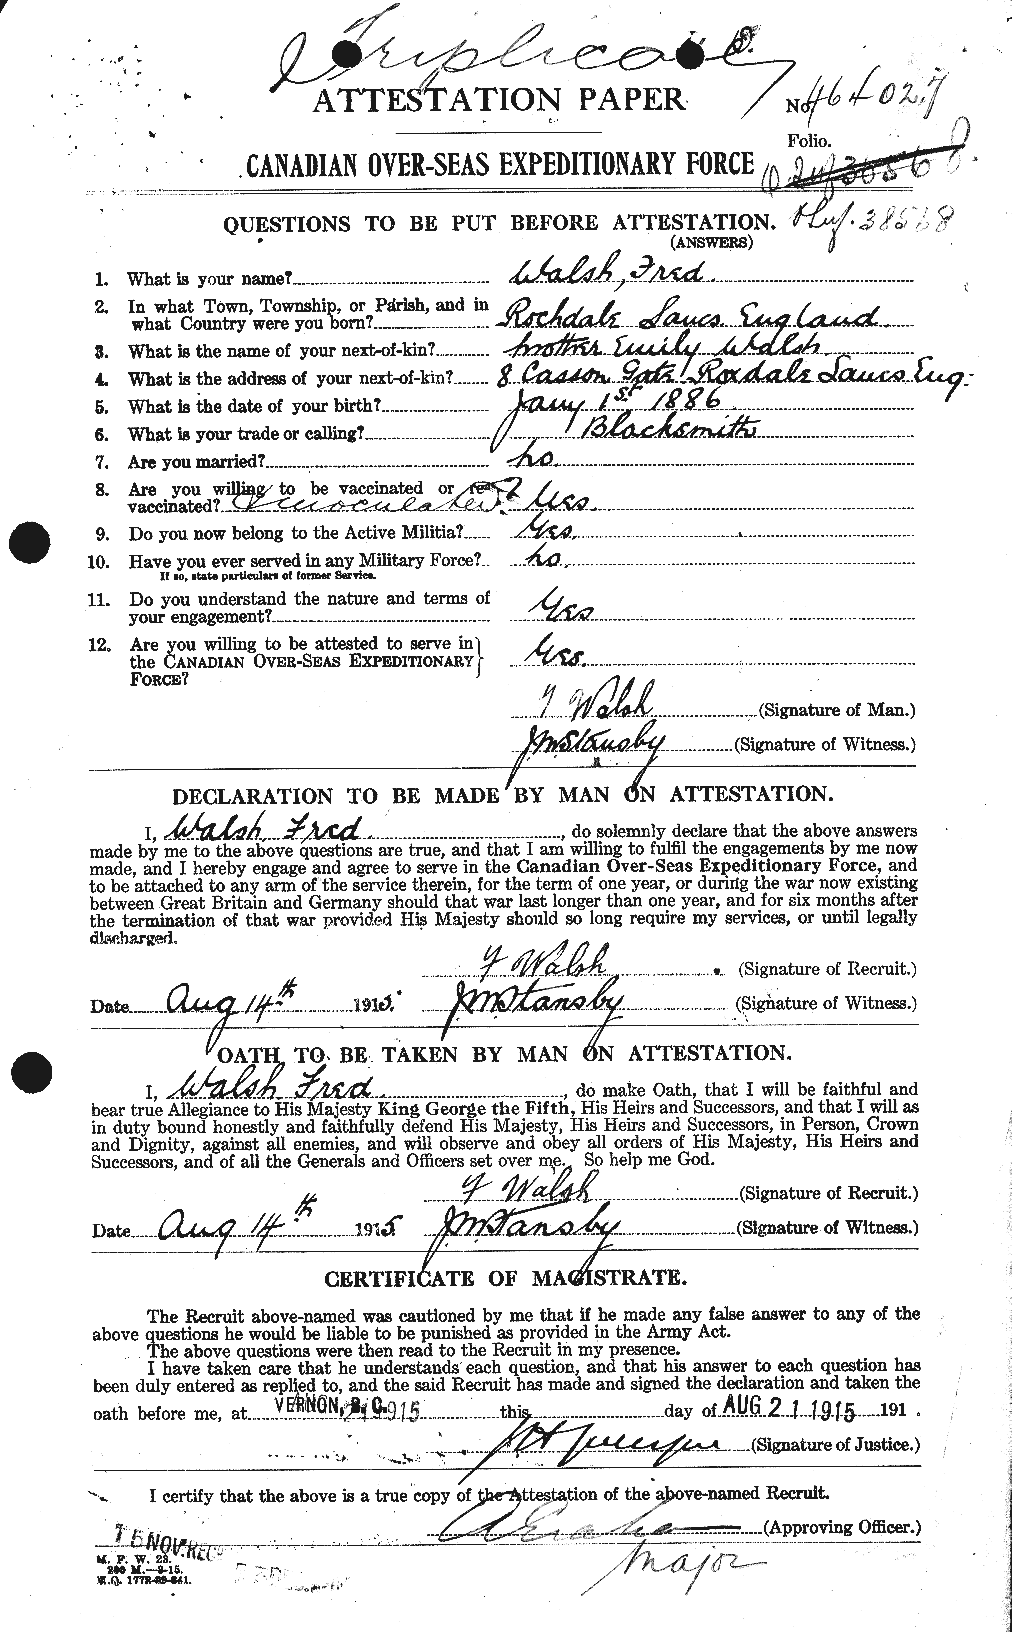 Personnel Records of the First World War - CEF 652772a